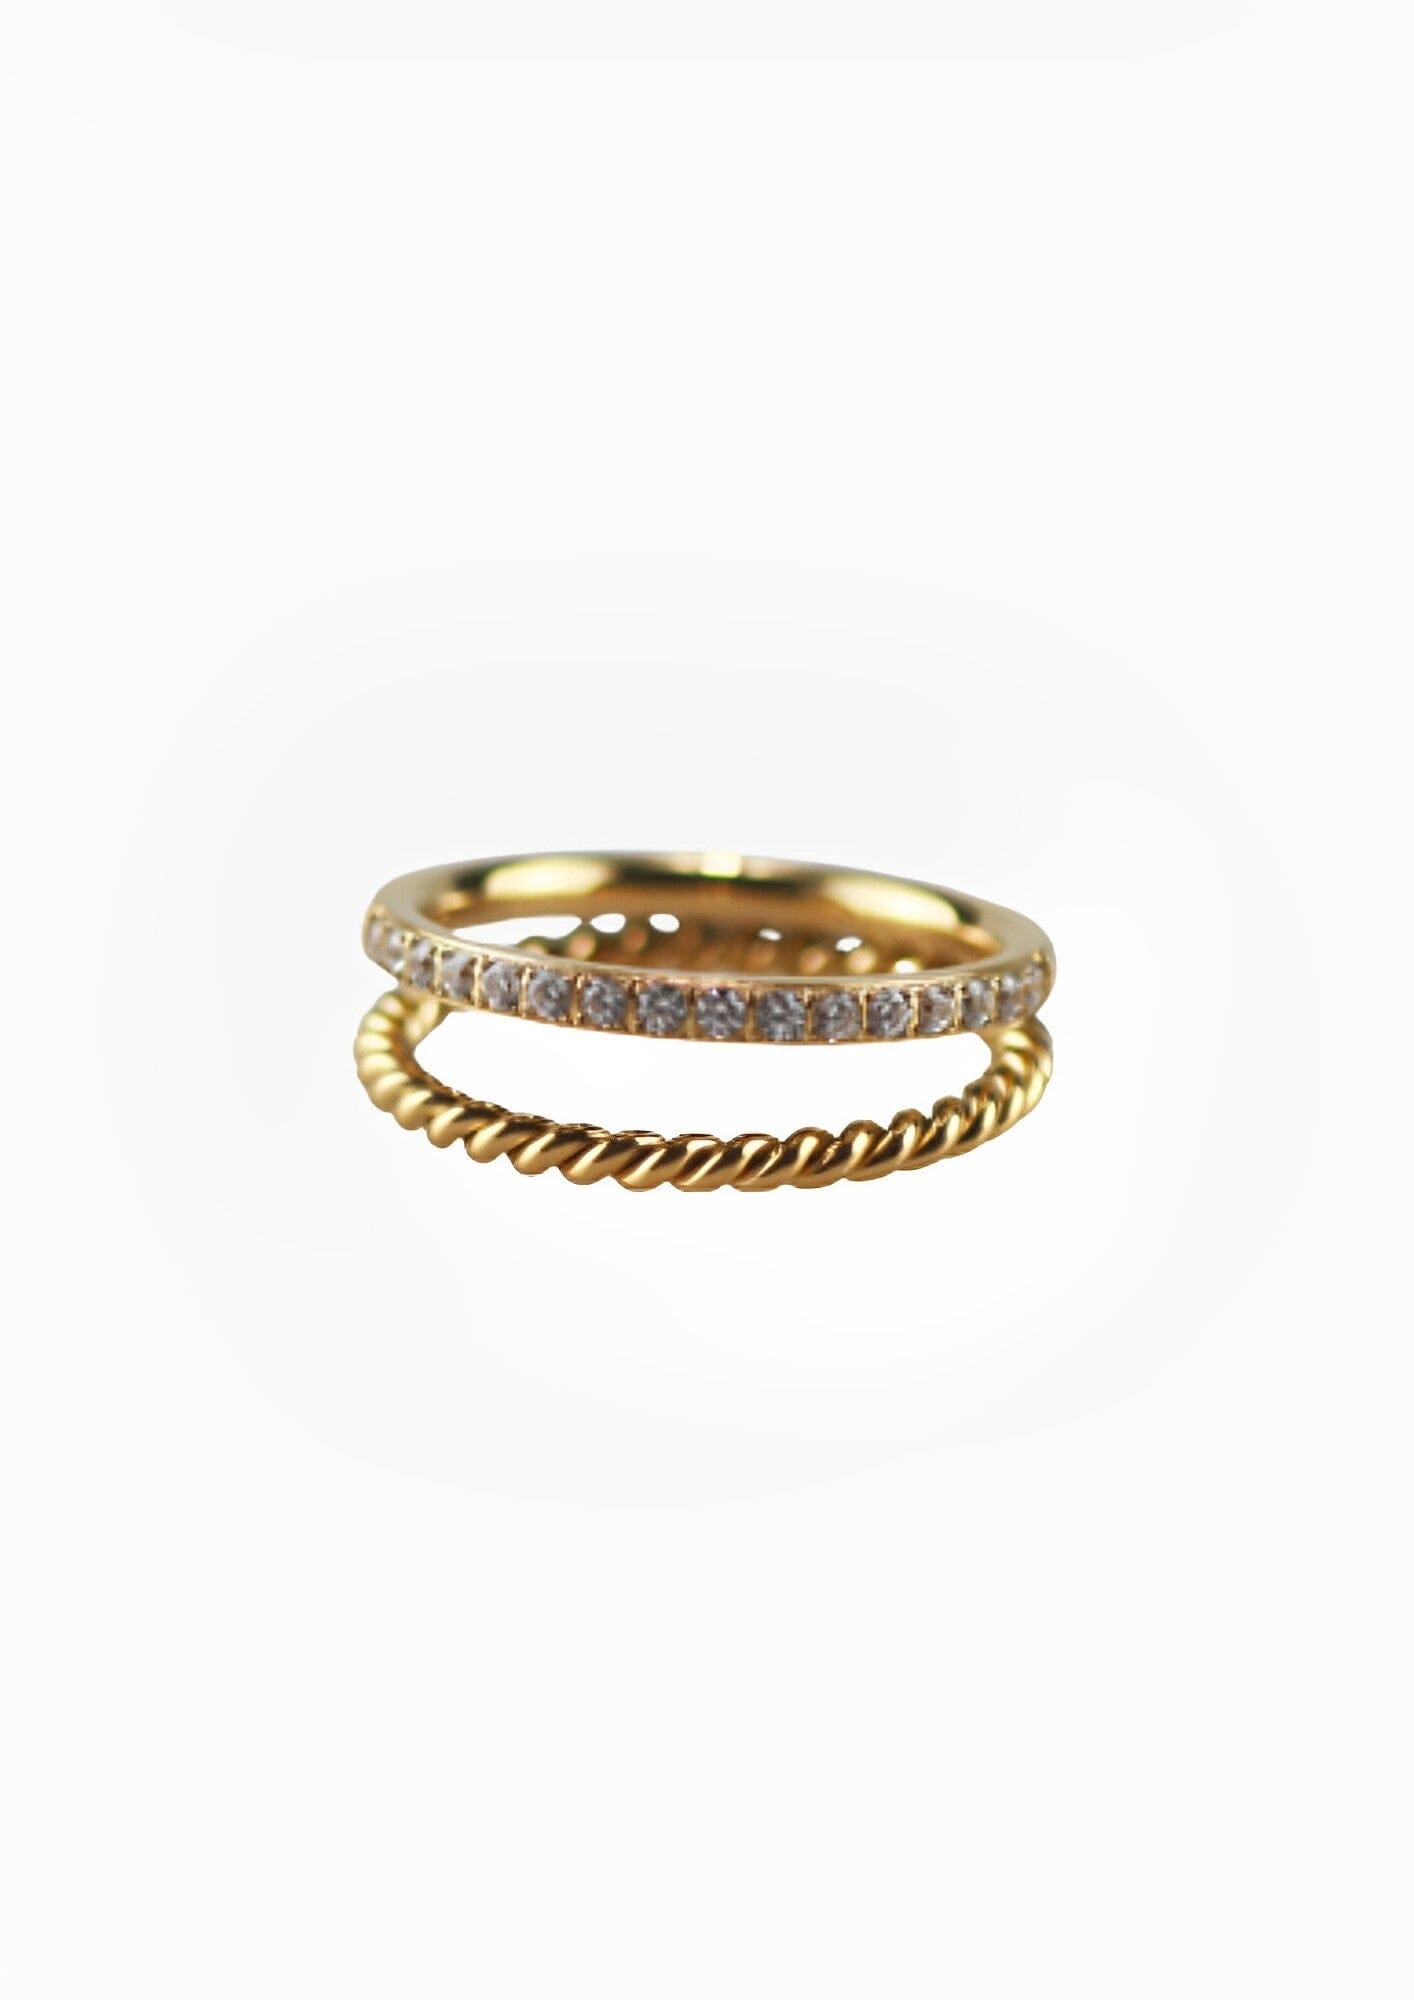 FRIO RING ring Yubama Jewelry Online Store - The Elegant Designs of Gold and Silver ! 